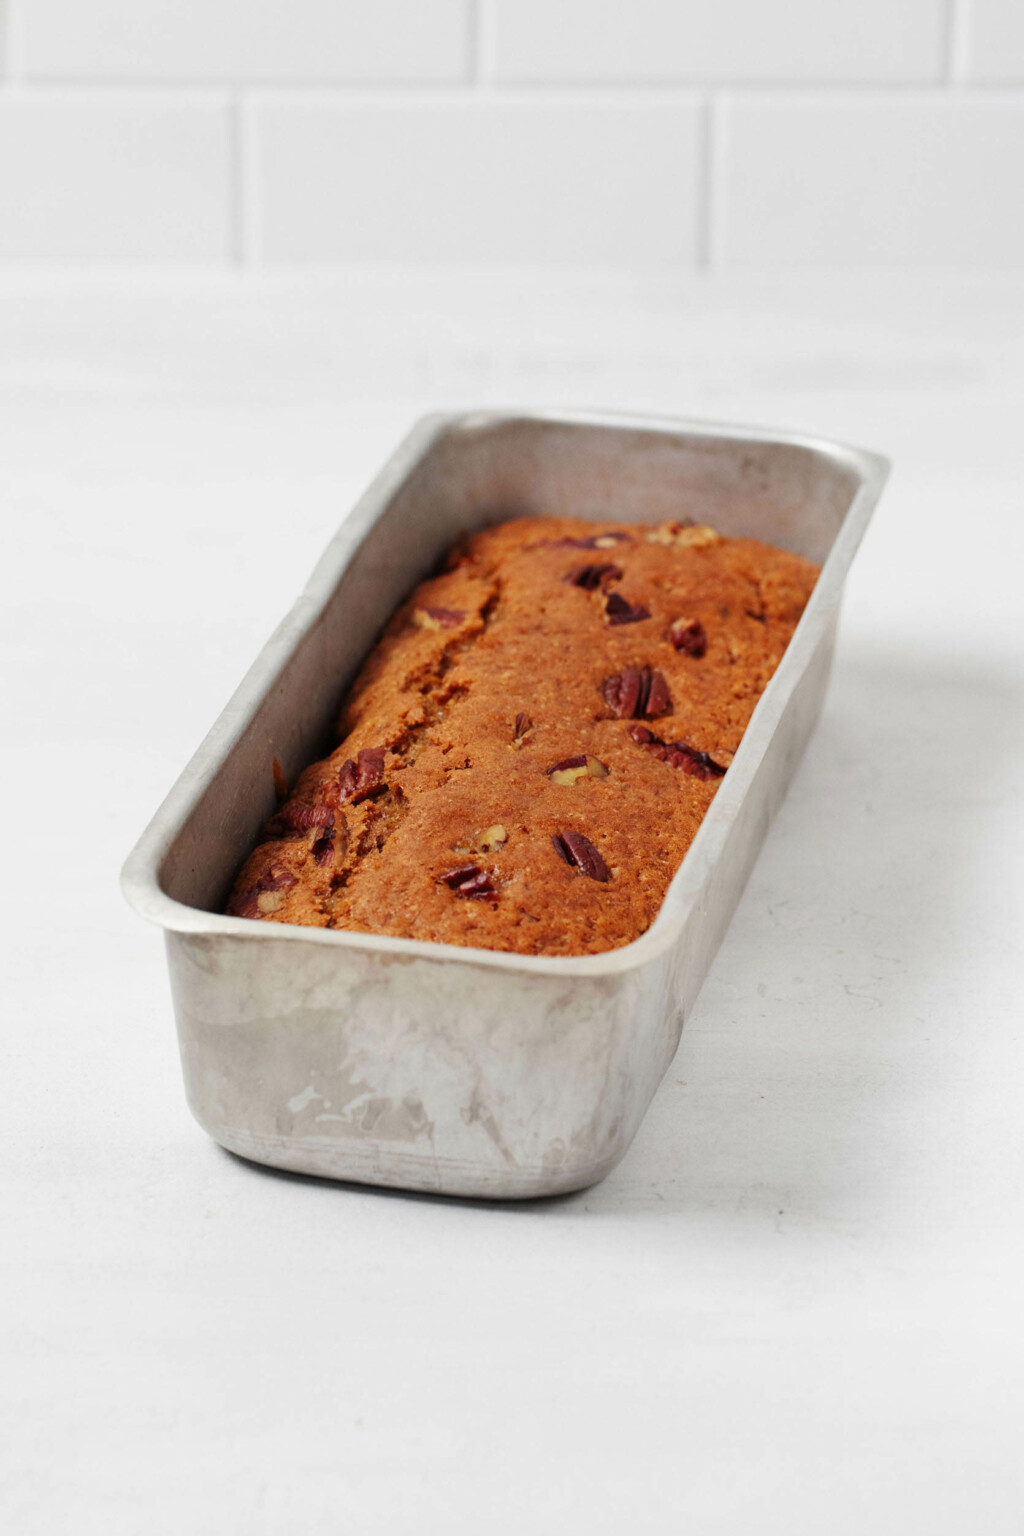 A metal loaf pan has been used to bake a spiced pecan citrus loaf.